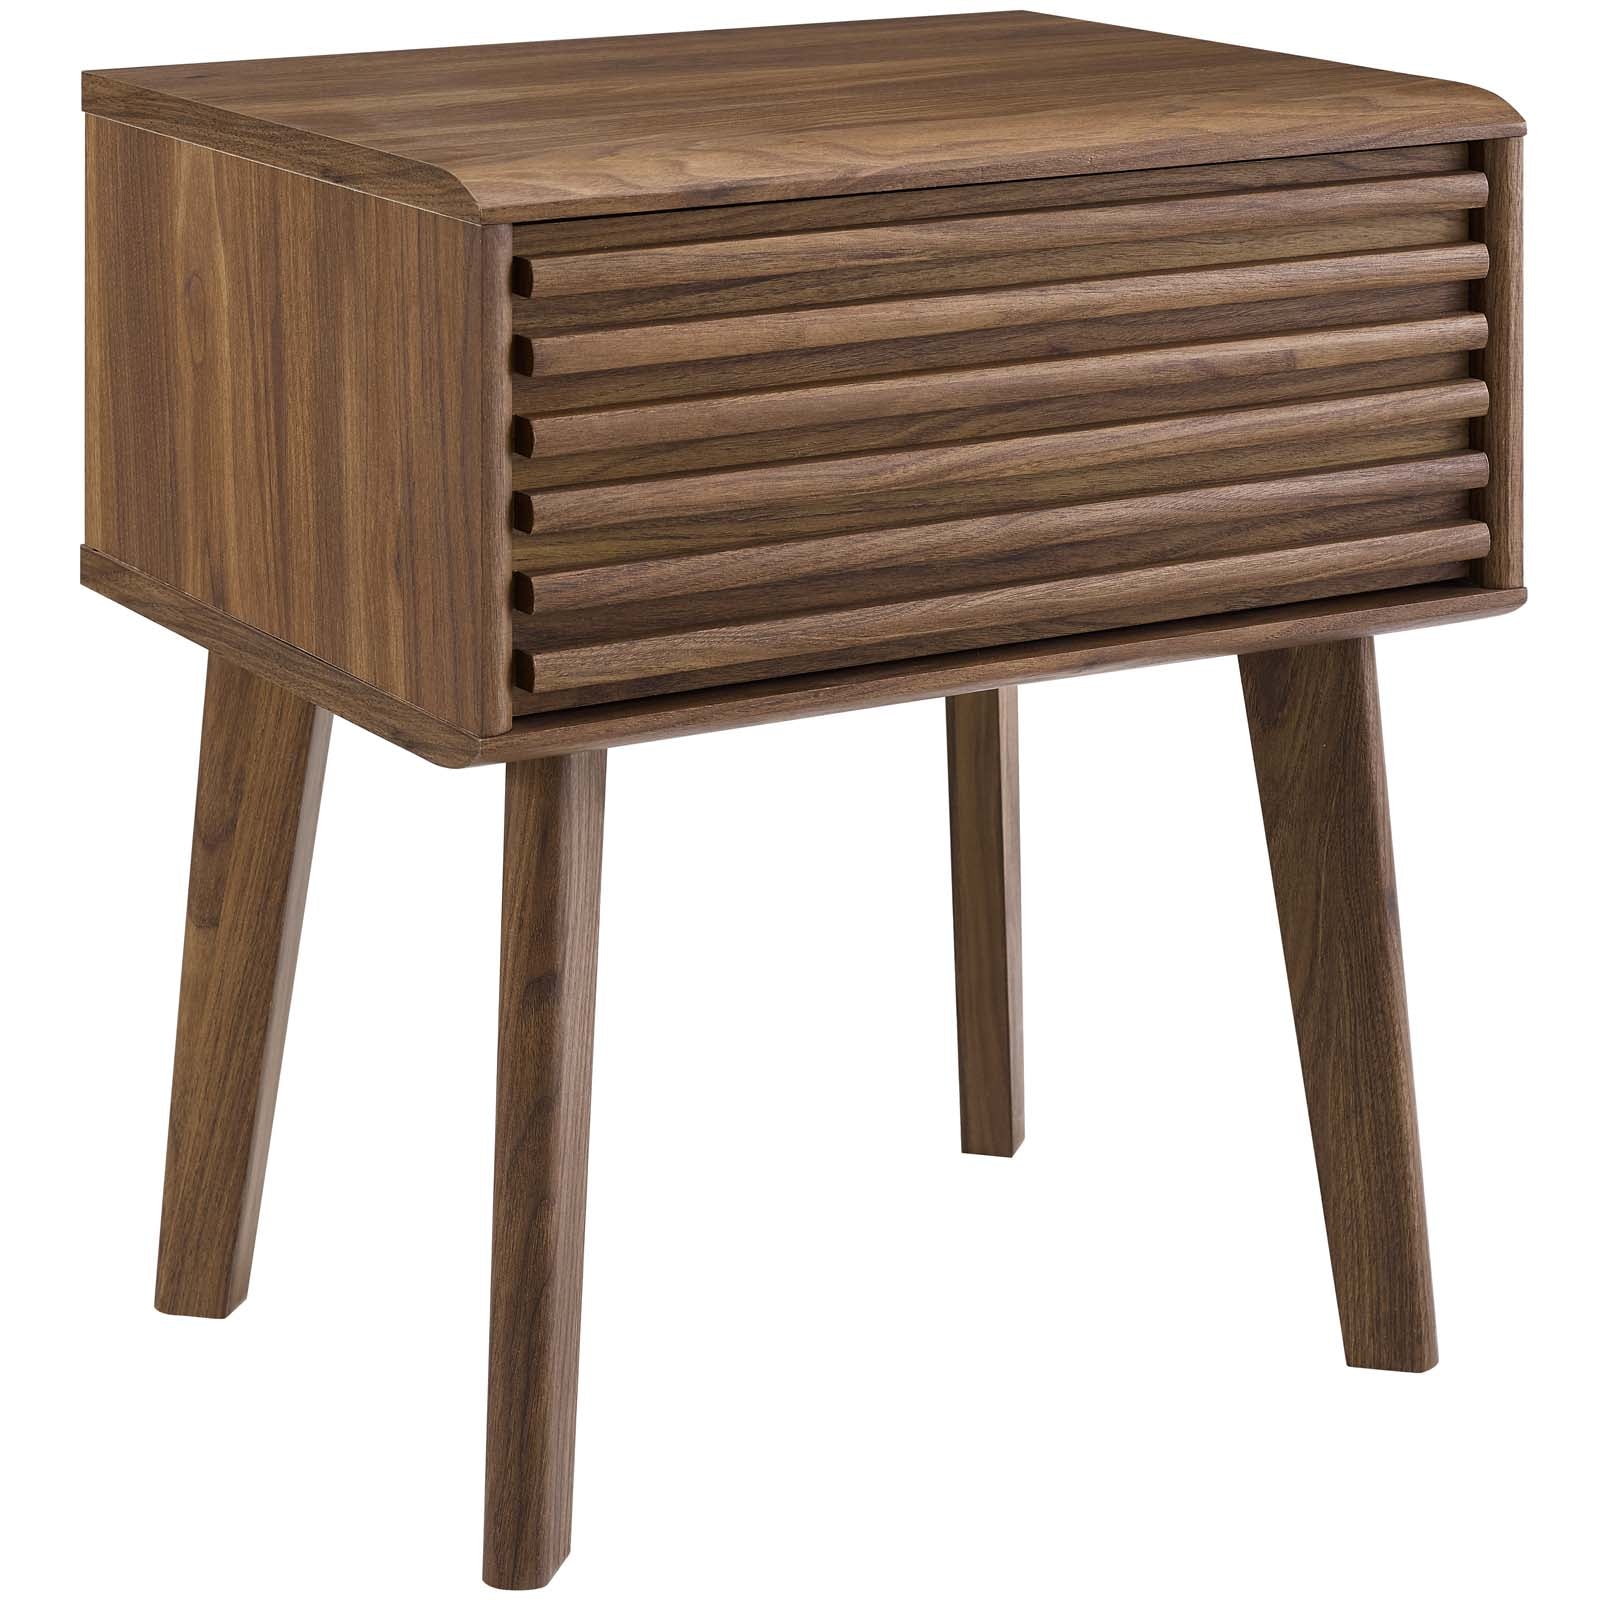 Mid Century Render Modern End Table Nightstand With Four Tapered Wood Legs - Small End Table In Walnut Grain Laminate